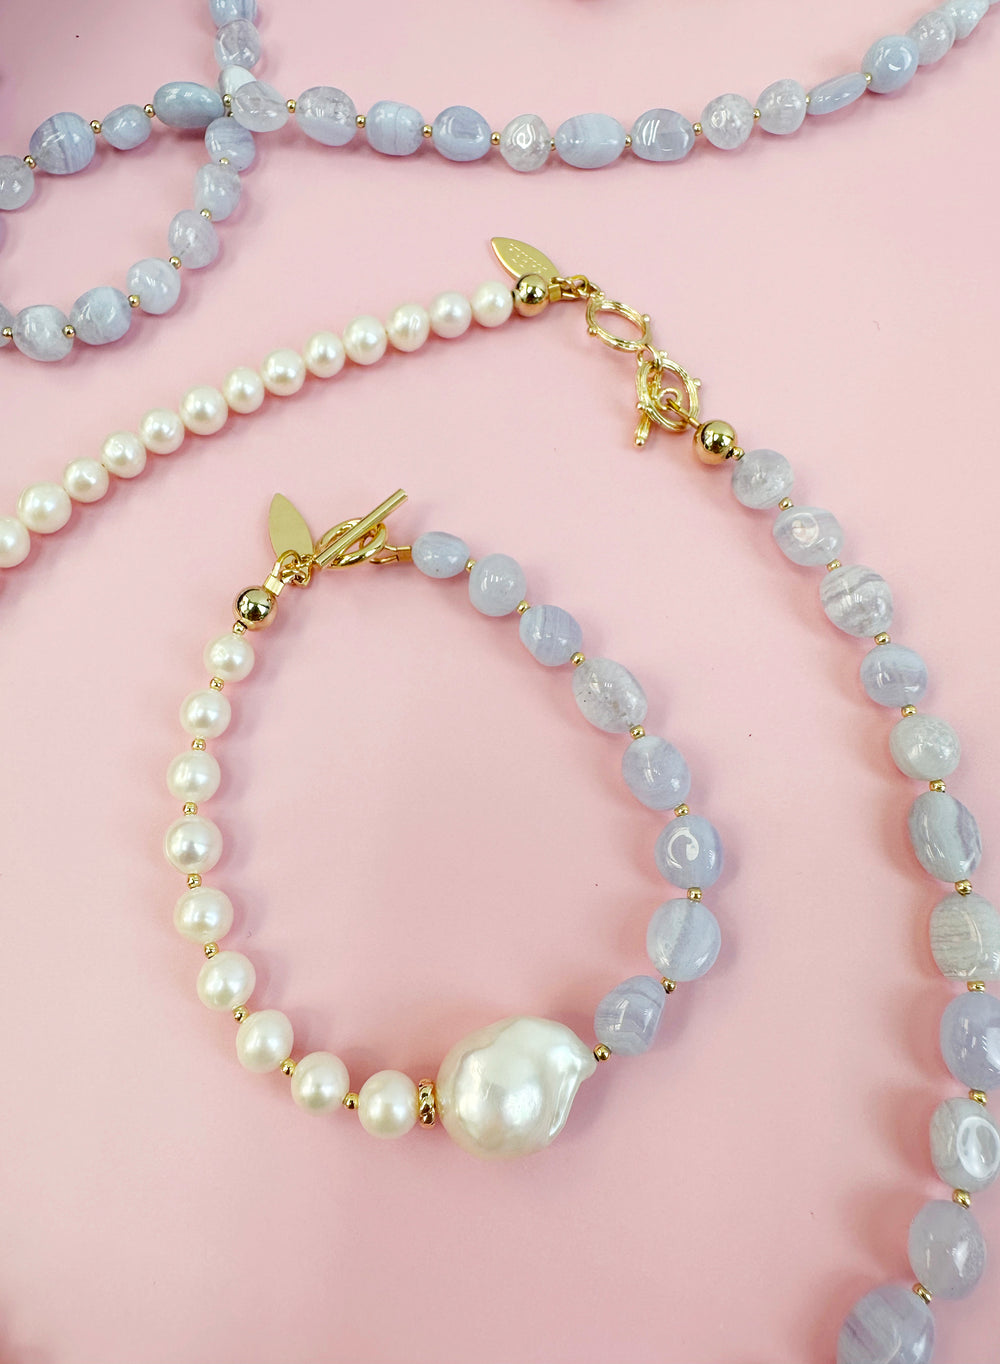  The combination of pearls and agate creates a harmonious balance, making it a versatile accessory for any occasion.